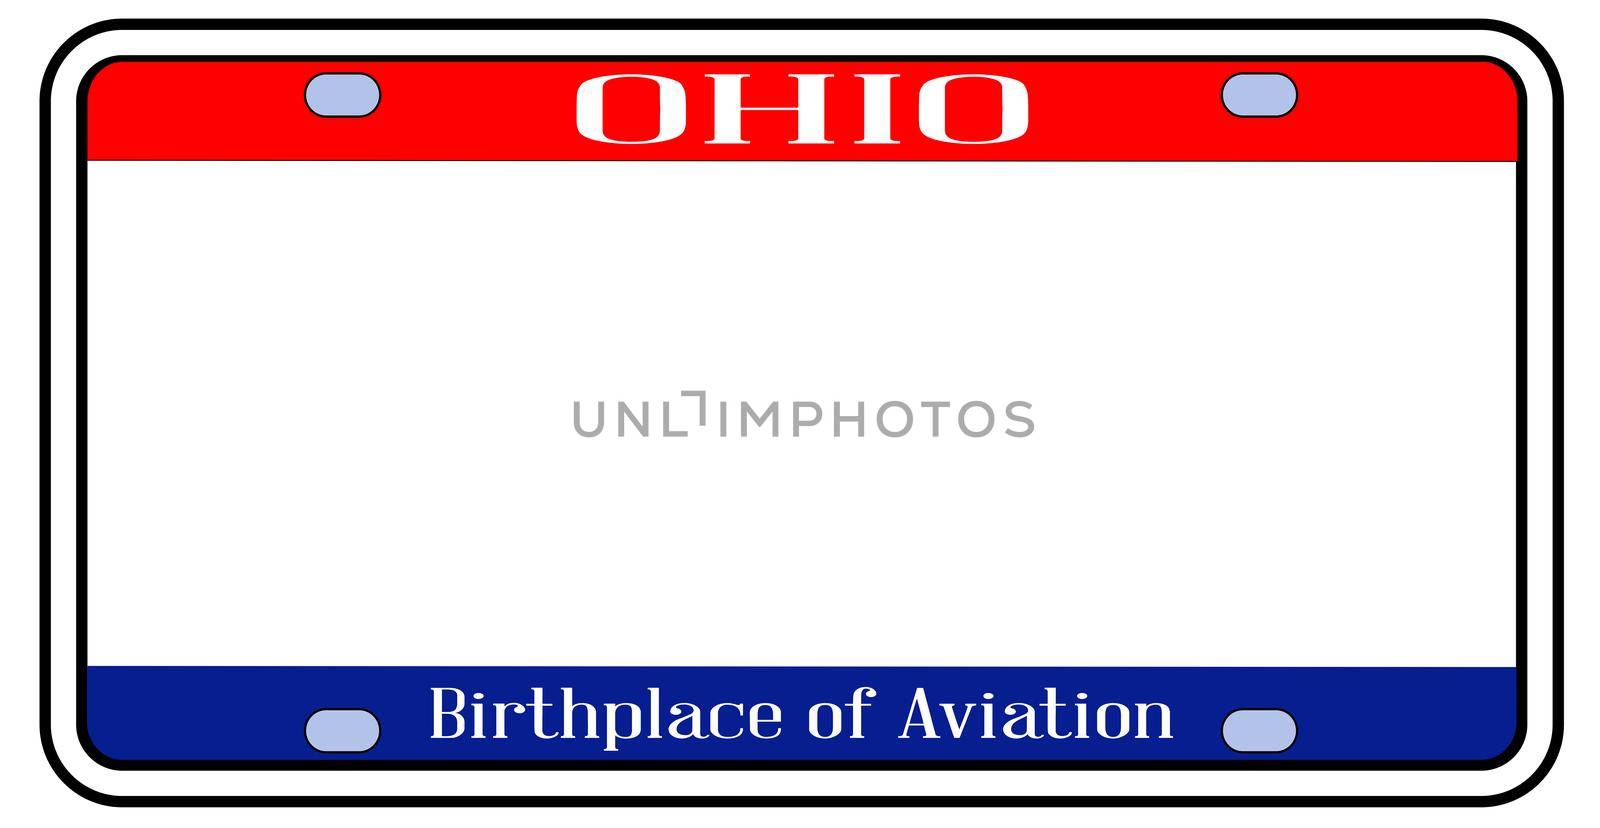 Ohio state license plate in the colors of the state flag with icons over a white background